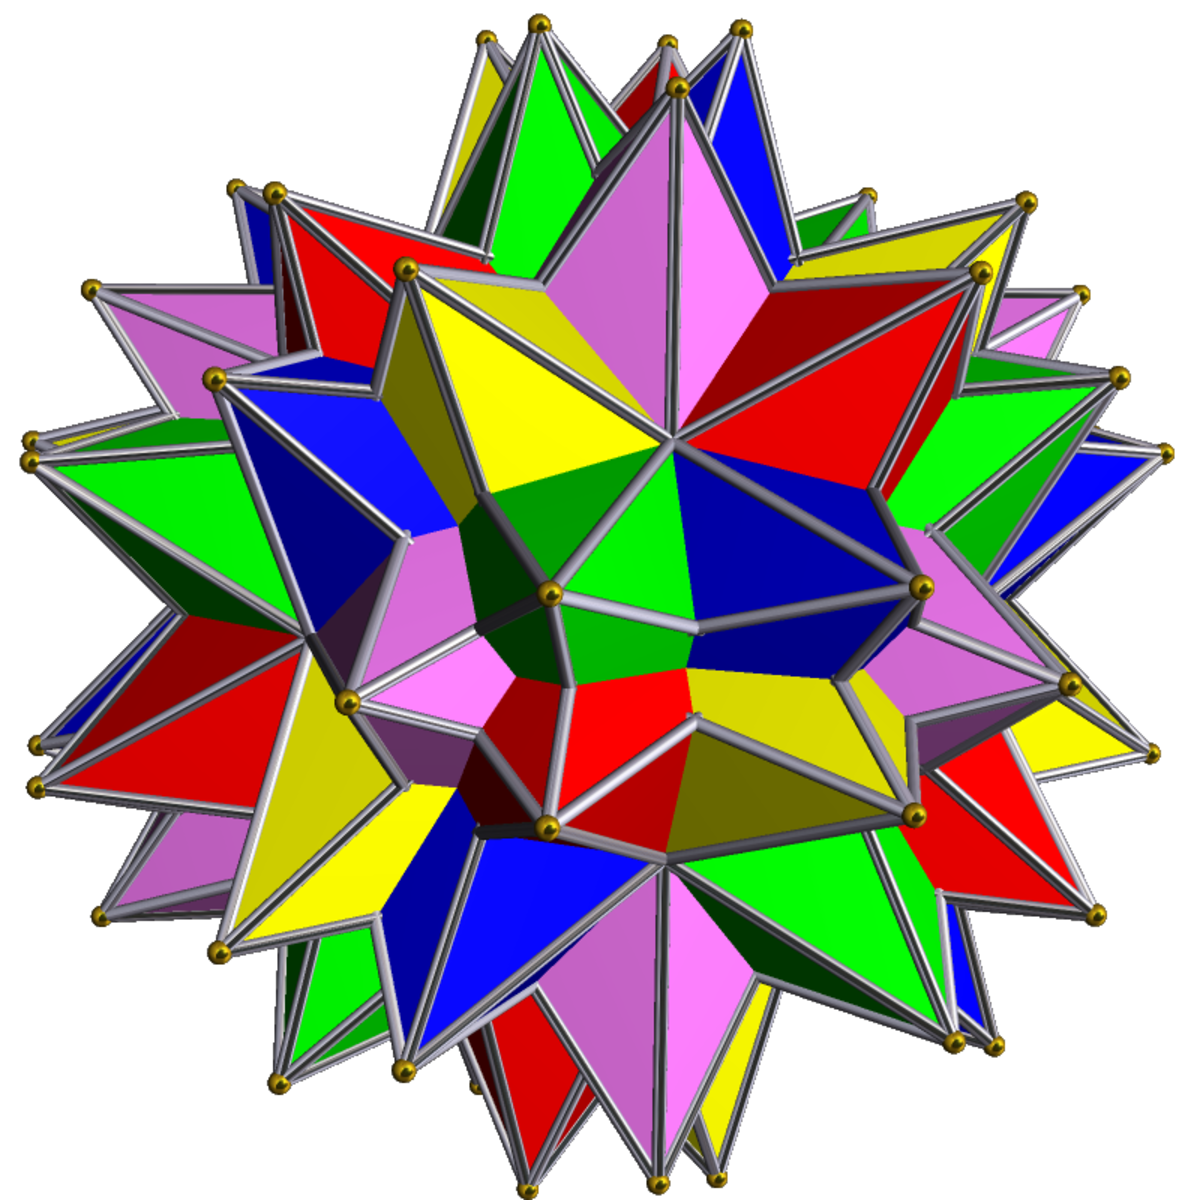 UC51-5 small stellated dodecahedra.png